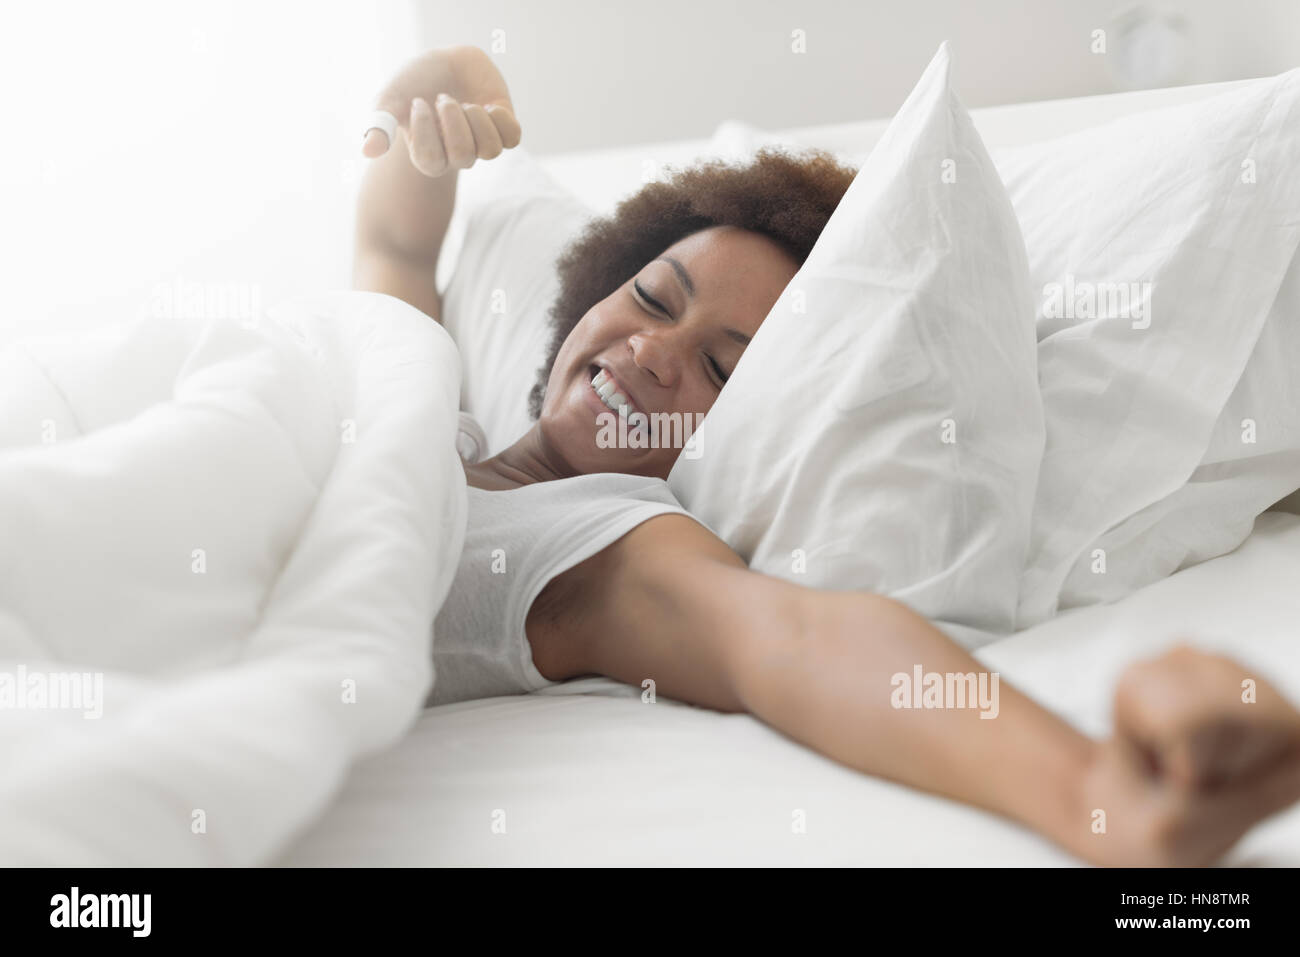 Beautiful woman waking up in her bed, she is smiling and stretching Stock Photo